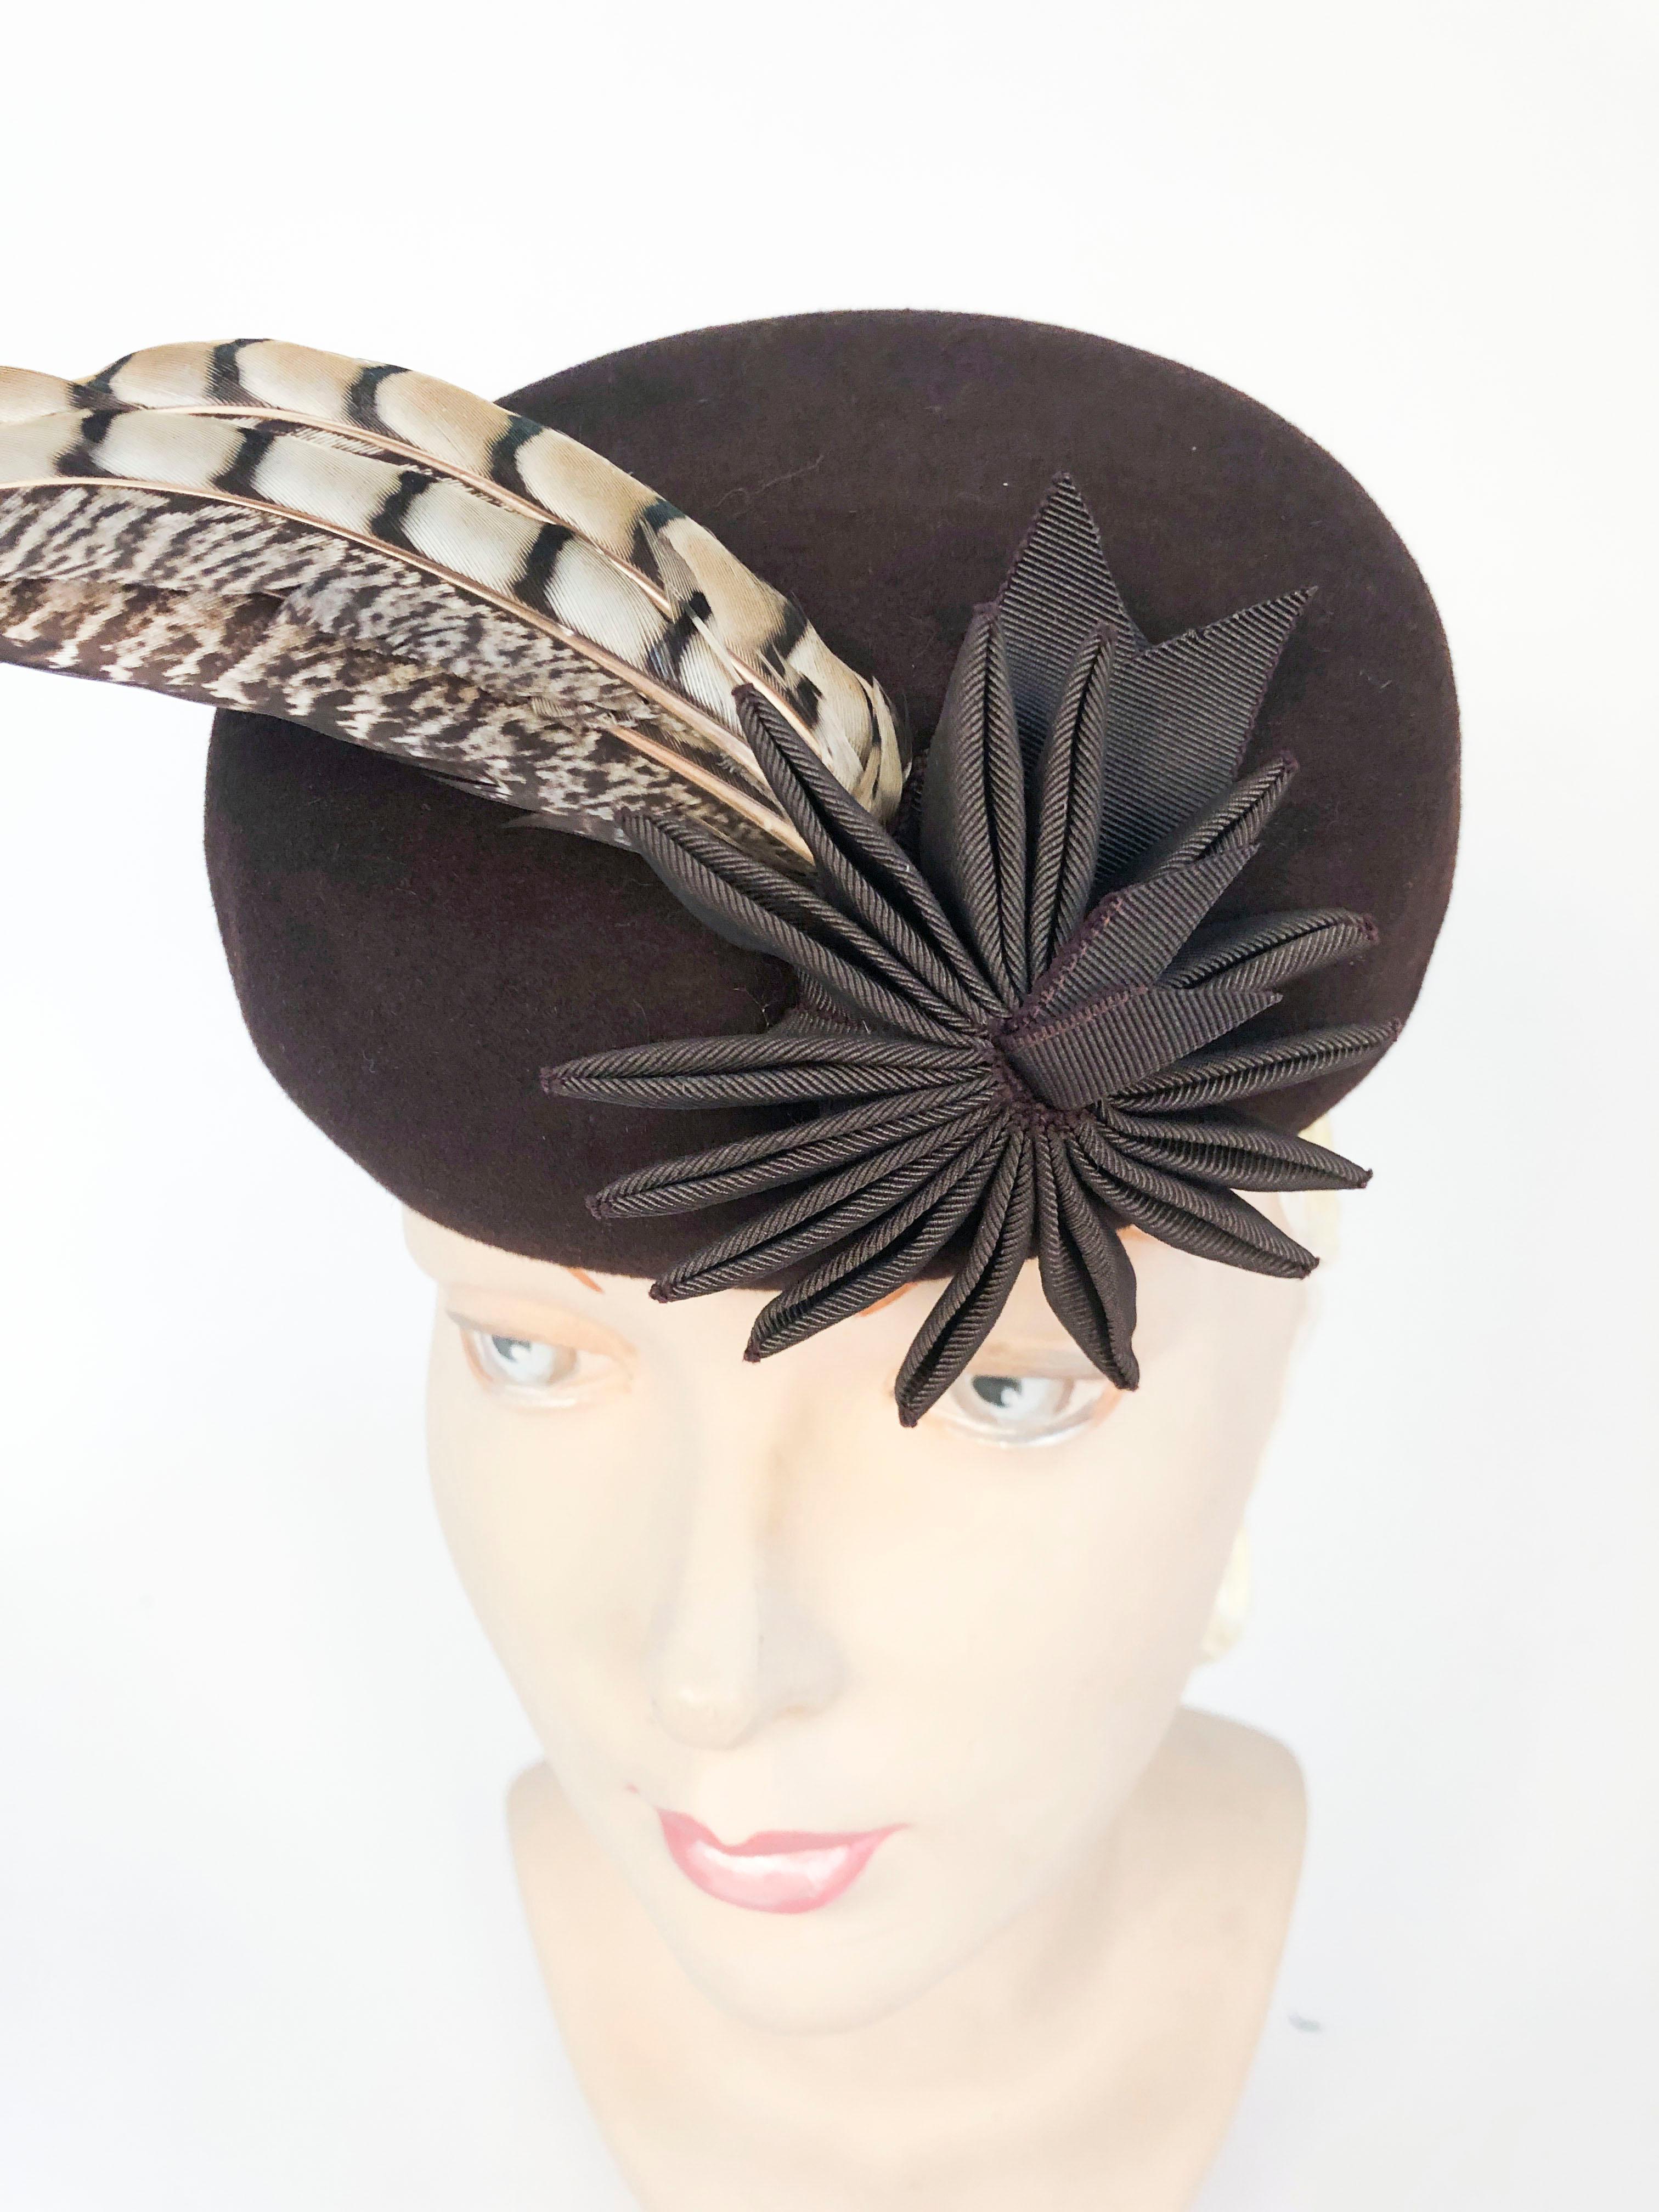 1930s/1940s Brown Fur Felt Sculpted Hat With Feather and Ribbon Accents. This hat is multi-dimensional with its grosgrain flower/tails and its 3 accent feathers.This hat has a back panel to xlant the hat and including the matching hand-made hatpin.